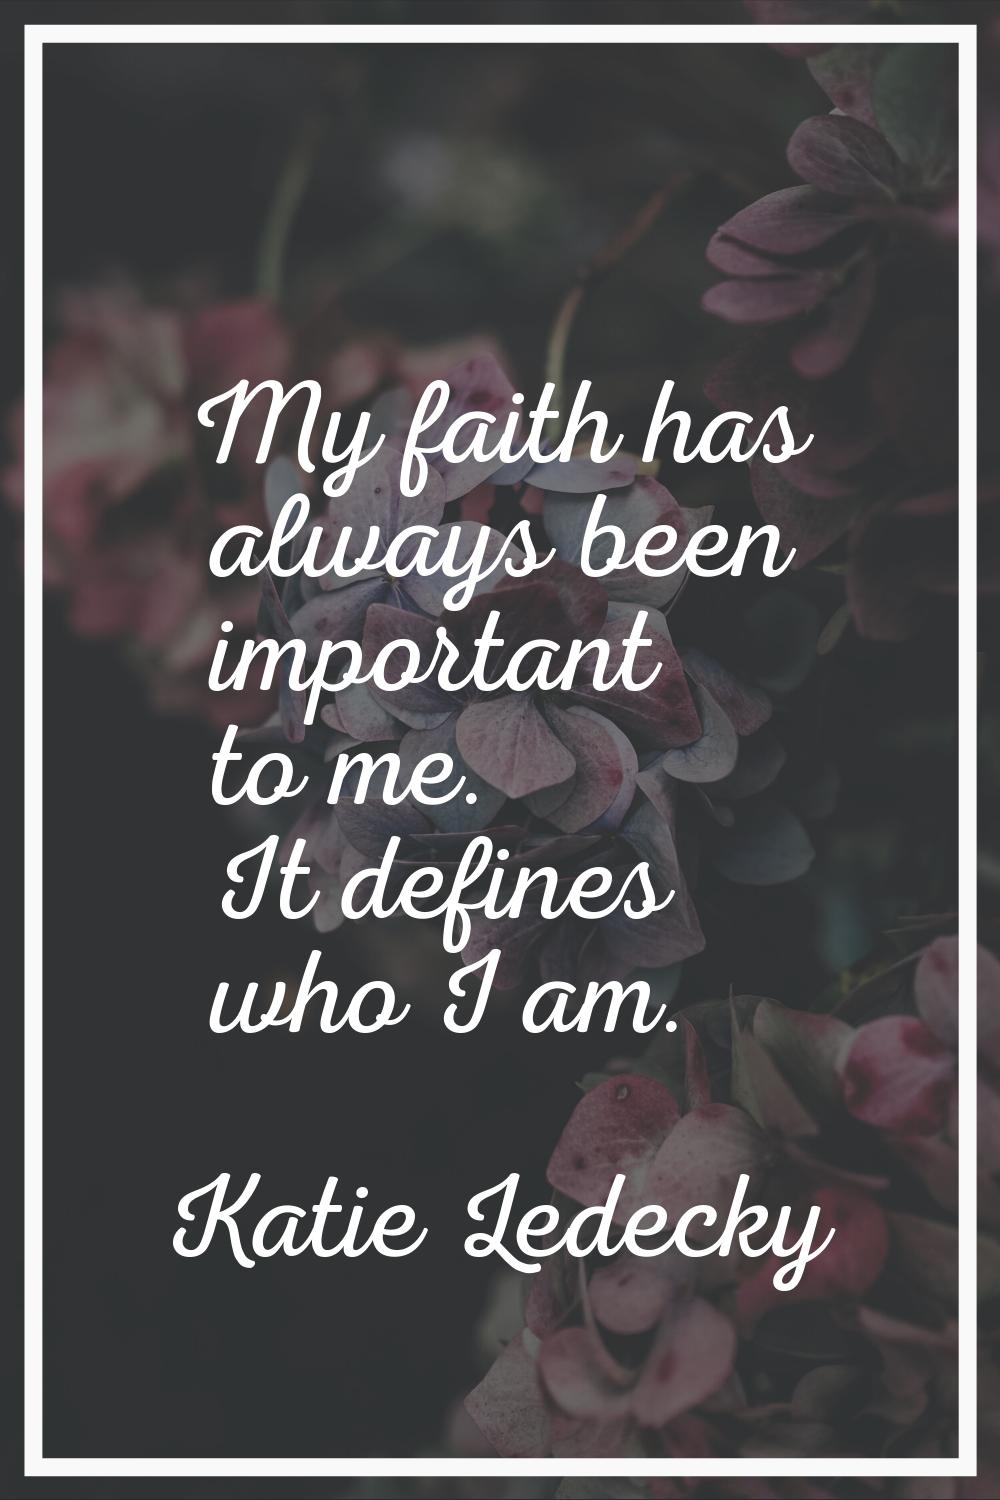 My faith has always been important to me. It defines who I am.